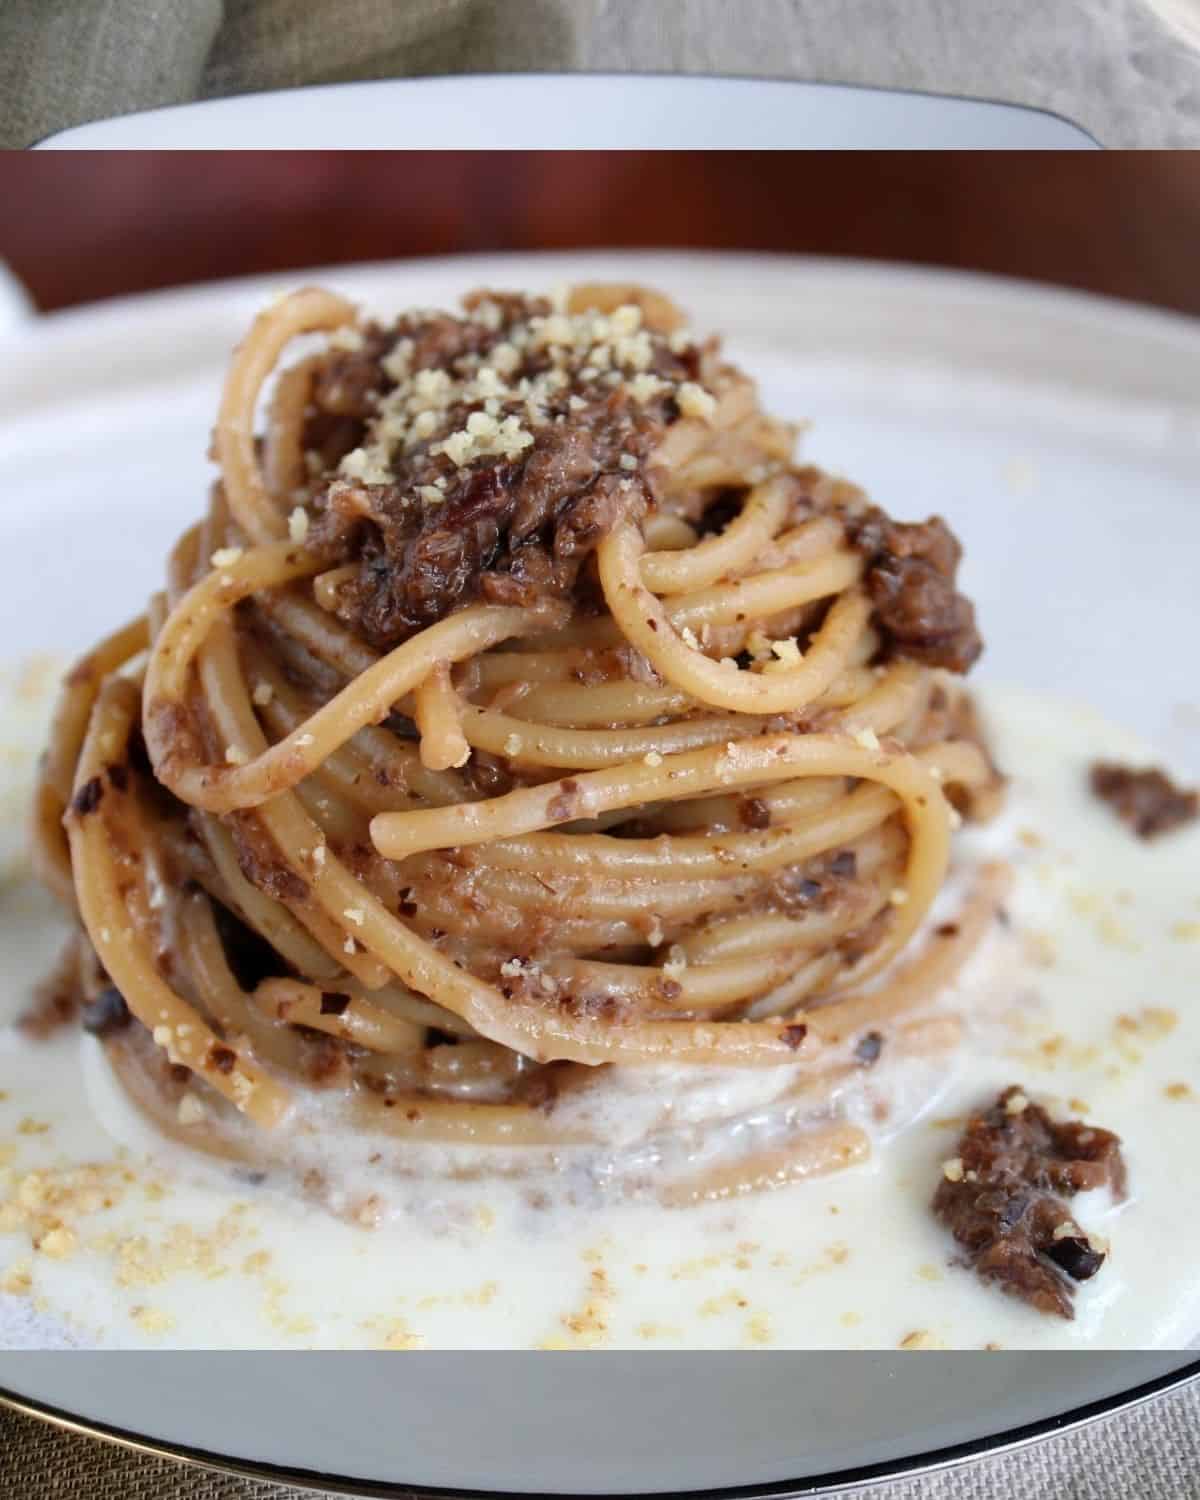 Spaghetti with Italian Radicchio in a white plate. Pasta sit on a cheese layer and it is topped with radicchio and walnut kernels